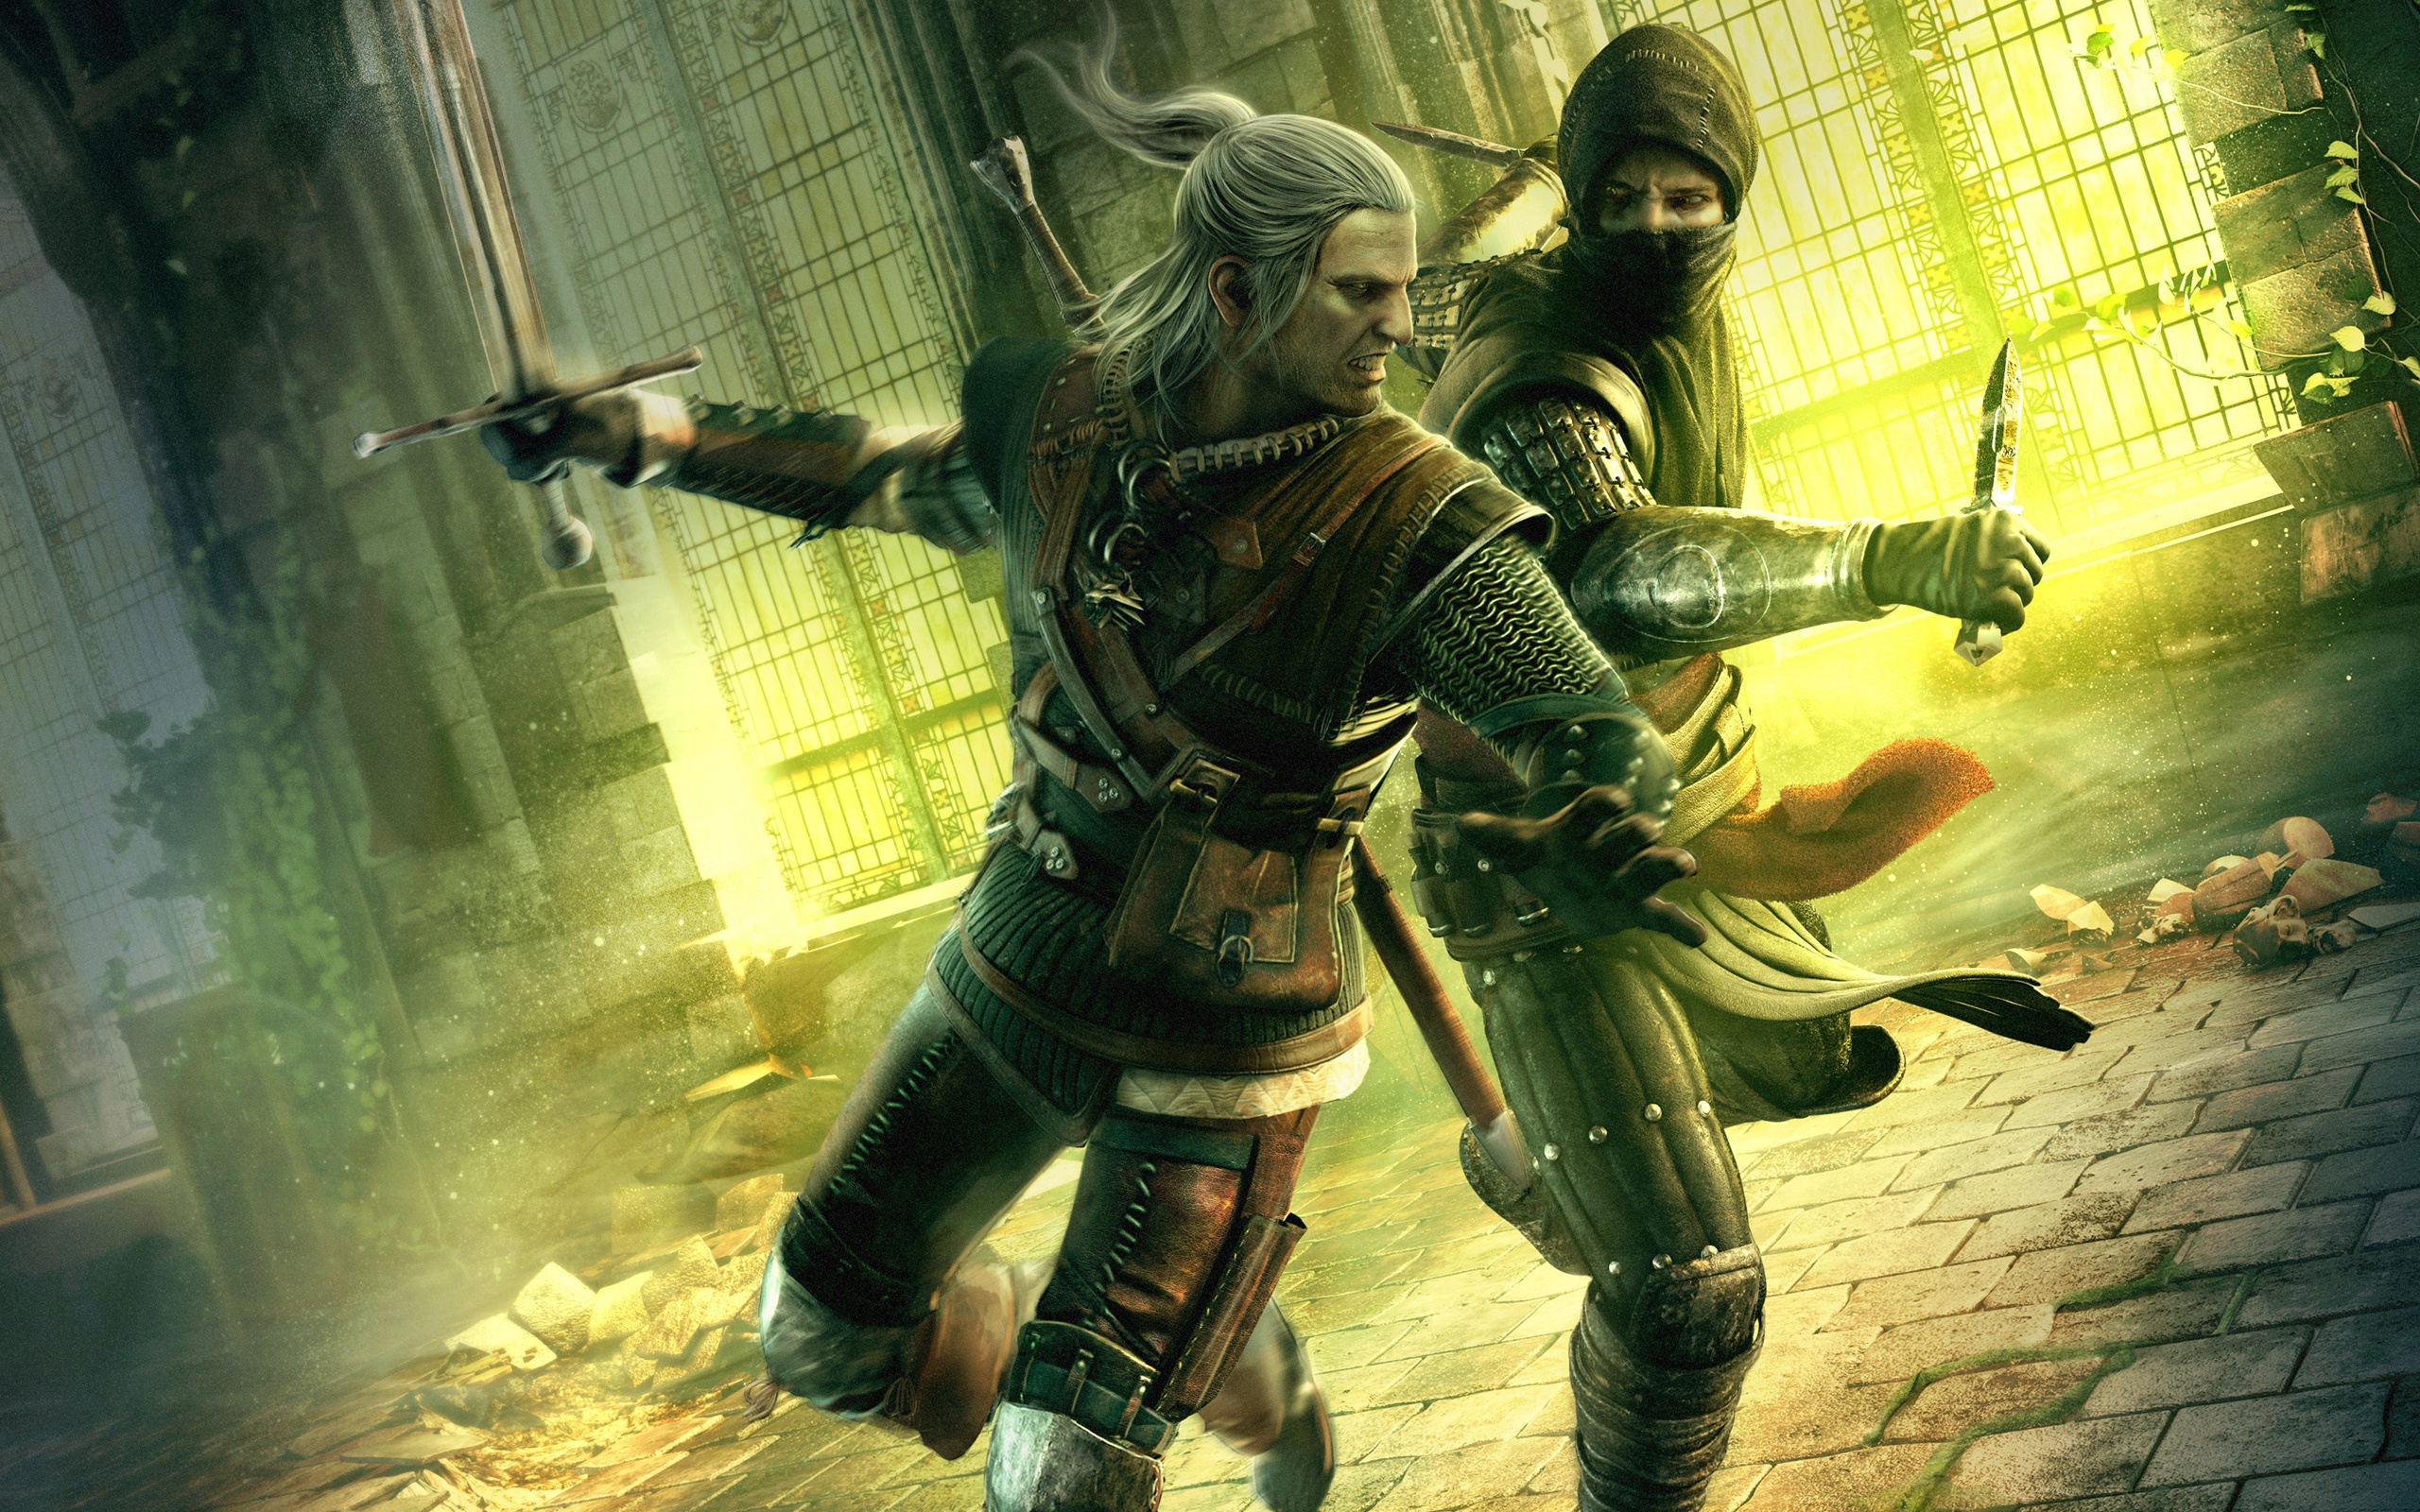 Video Game The Witcher 2: Assassins Of Kings HD Wallpaper | Background Image